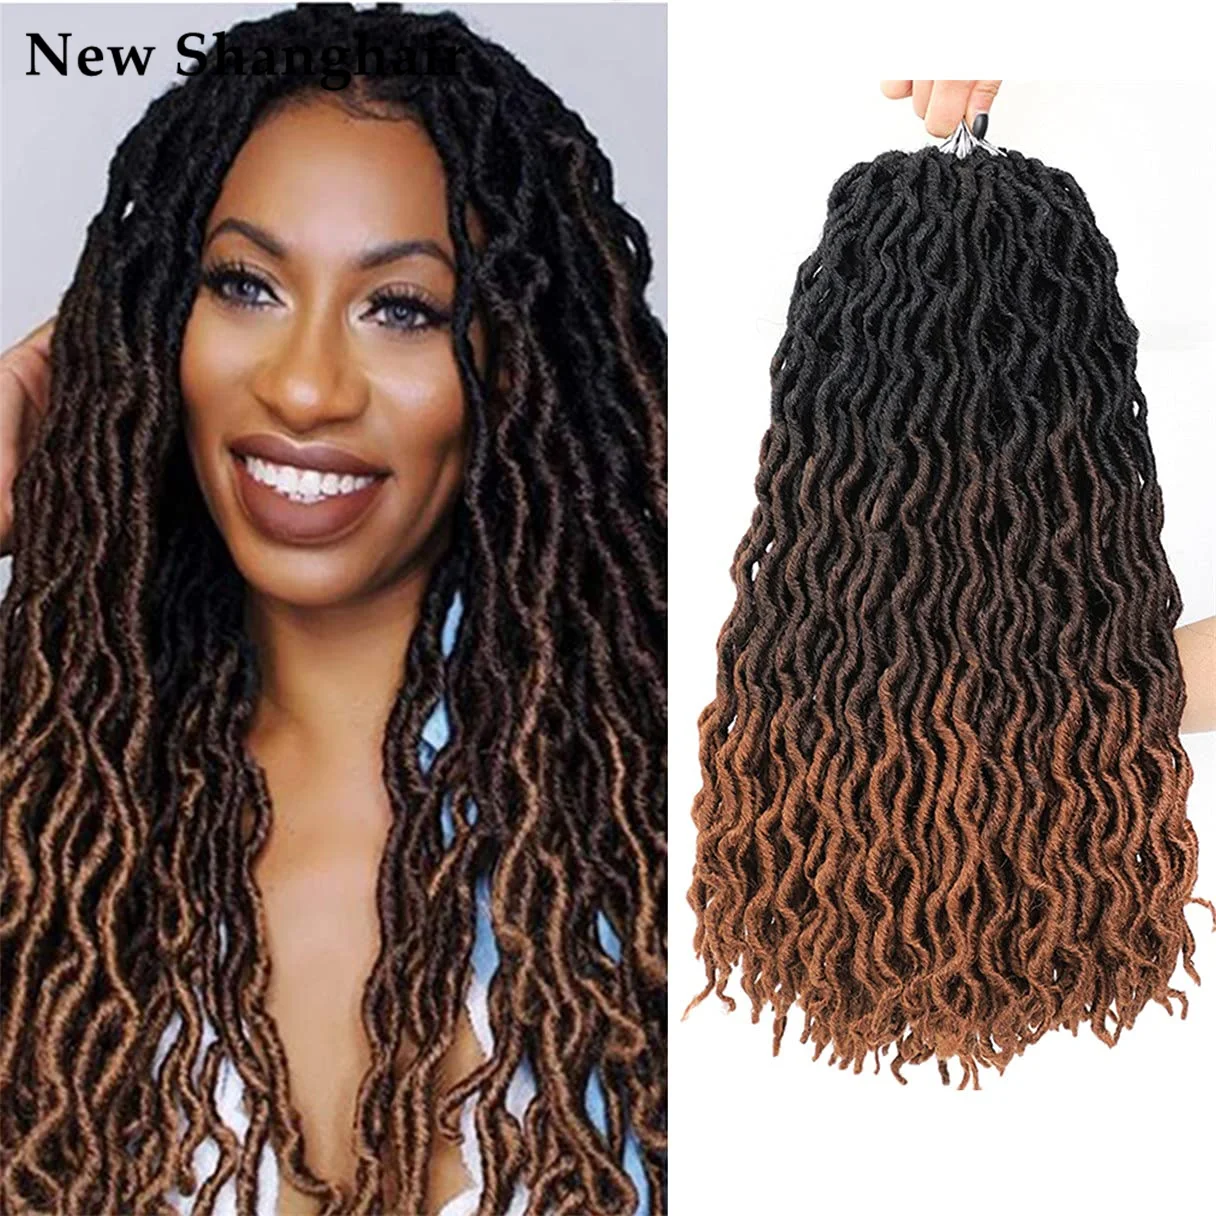 

Wavy Gypsy Locs Ombre Crochet Hair 18" Goddess Locs Faux Locs African Roots Dreadlocs Synthetic Braiding Hair Extensions NS18